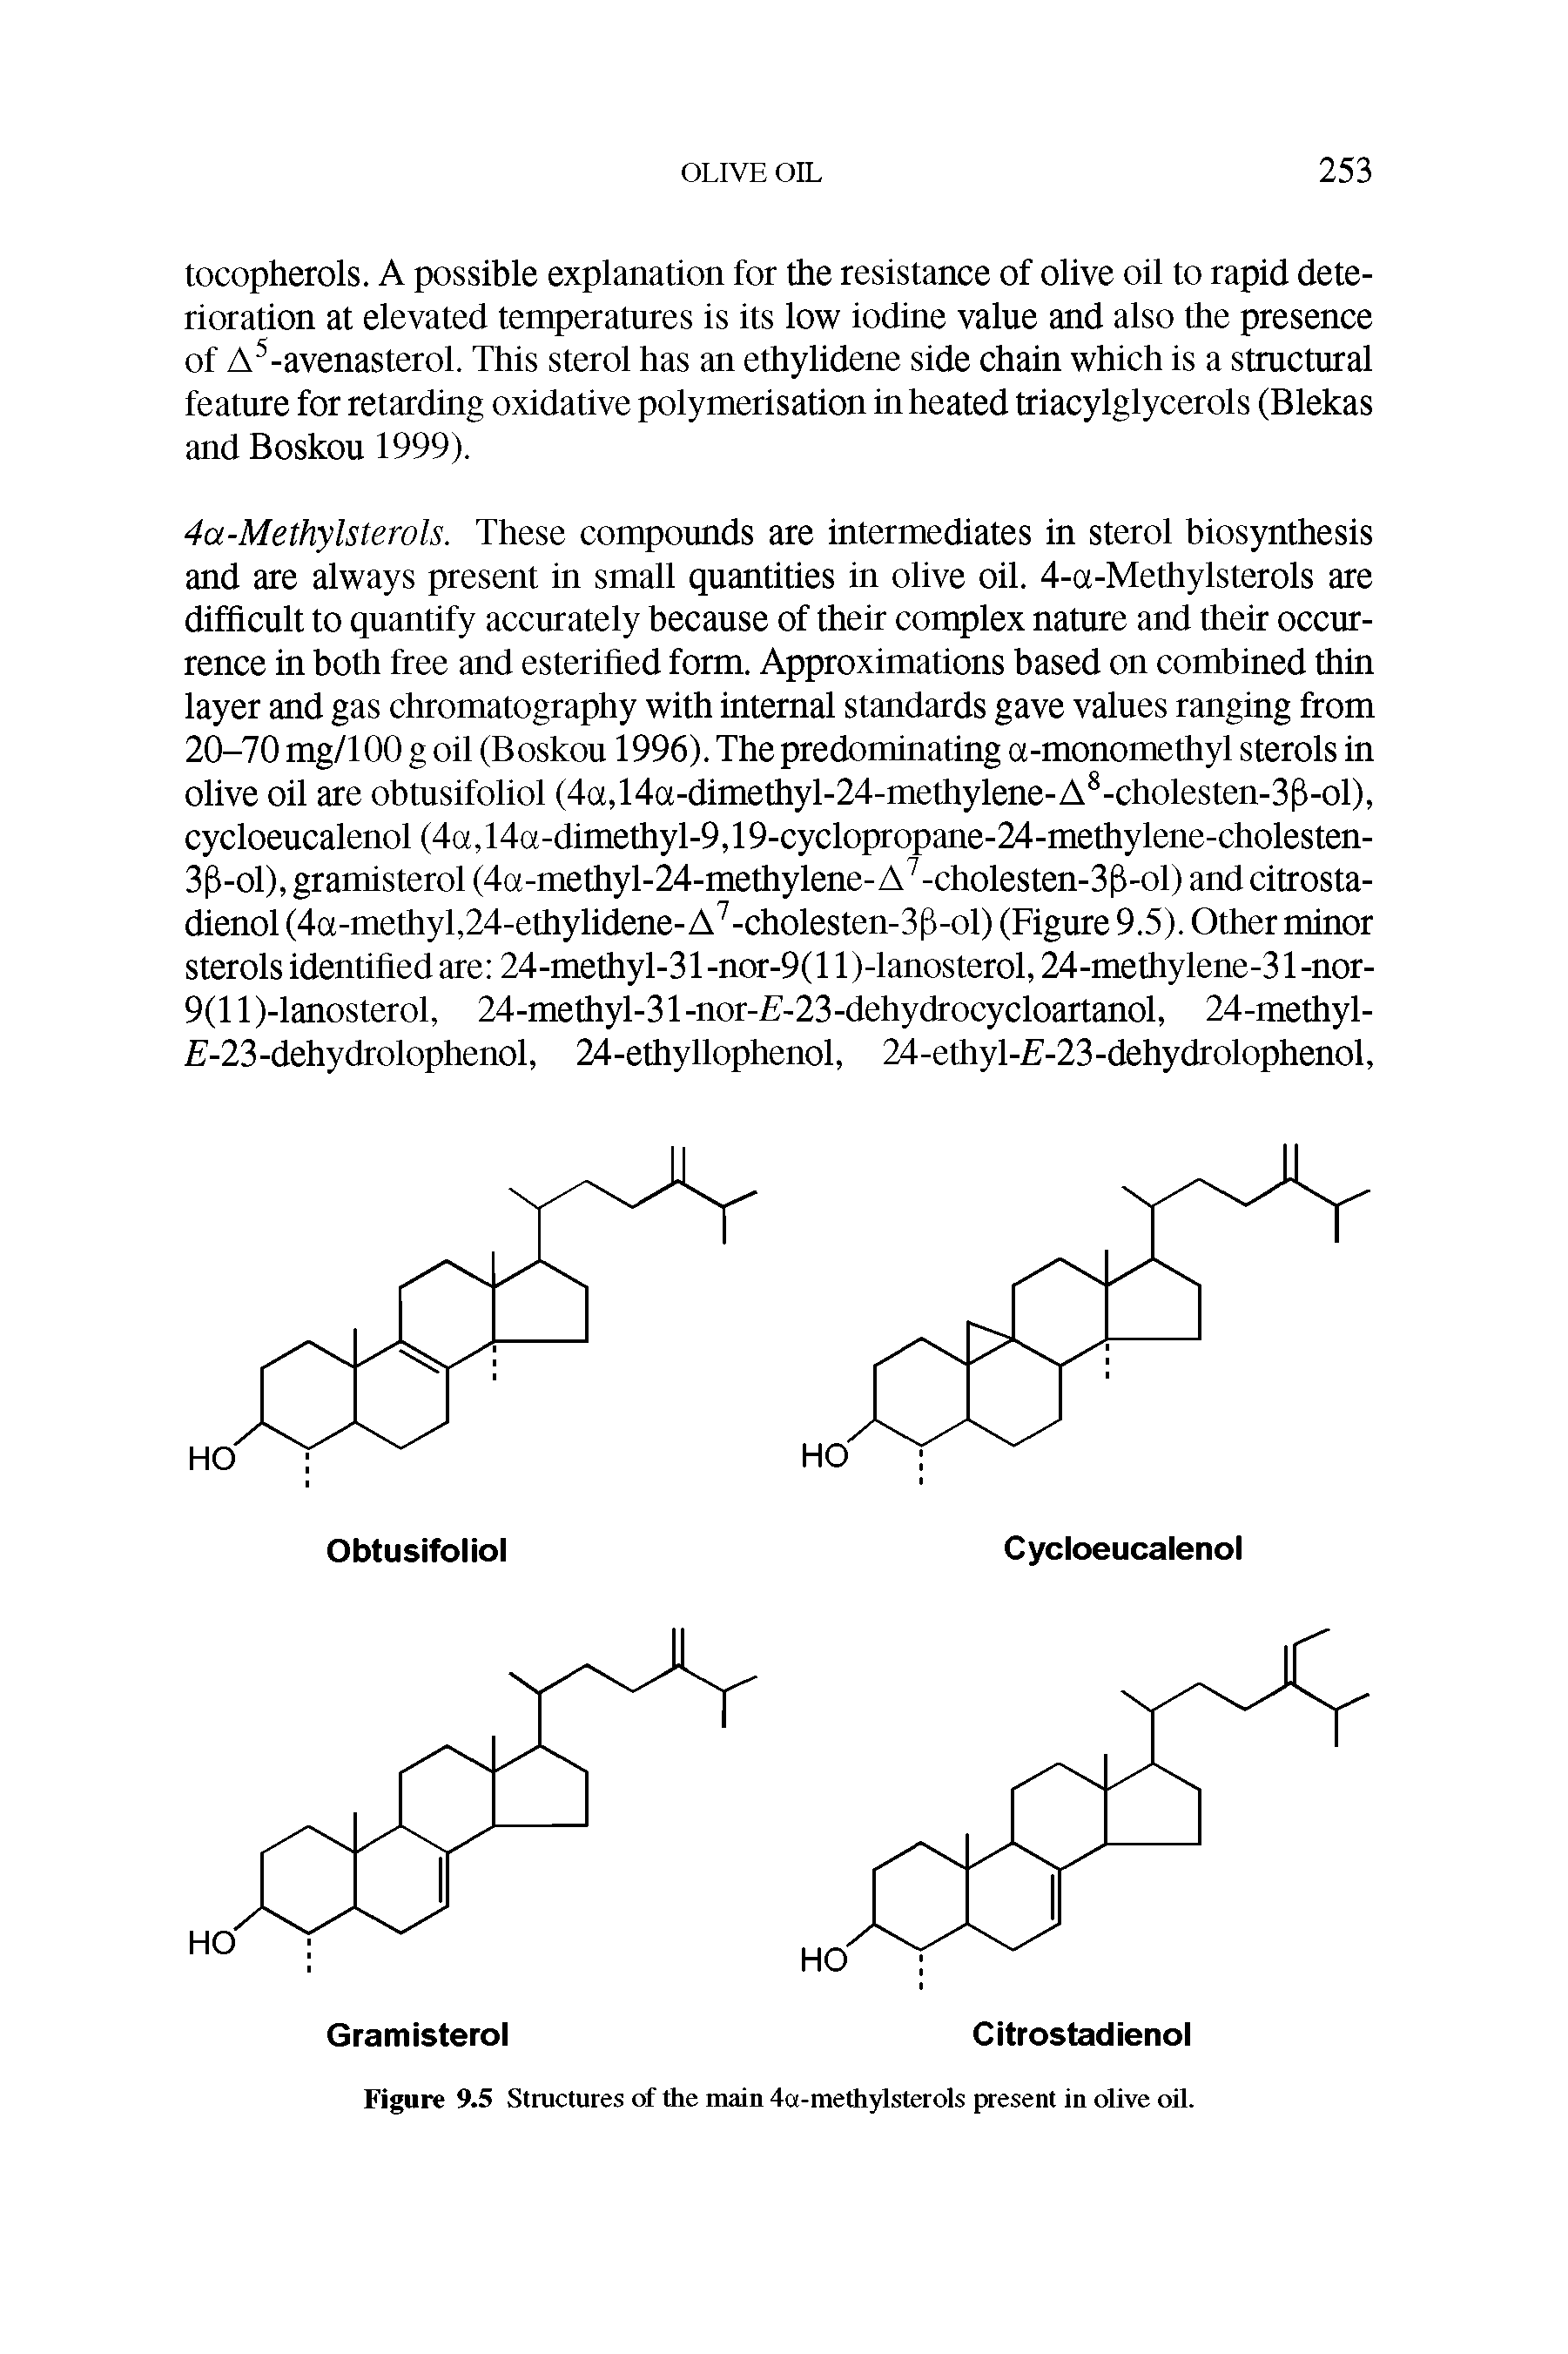 Figure 9.5 Structures of the main 4a-methylsterols present in olive oil.